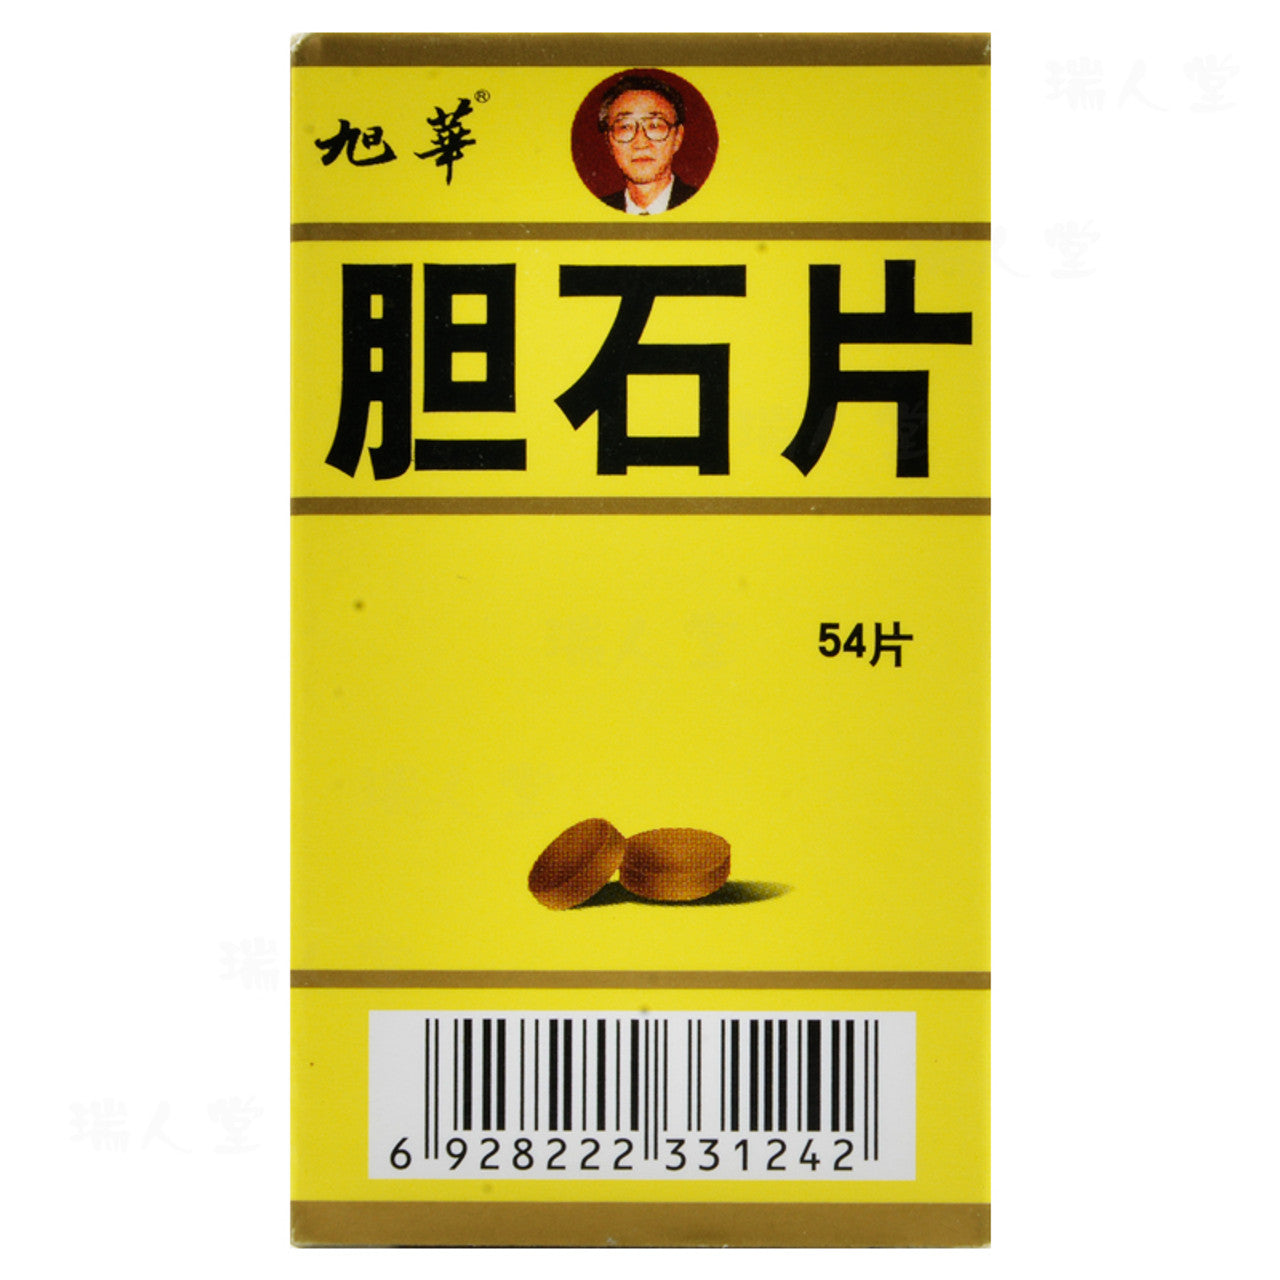 China Herb. Danshi Pian or Dan Shi Pian or Danshi Tablets for gallbladder stones and intrahepatic bile duct stones with Qi stagnation syndrome. Gallstone Tablets.